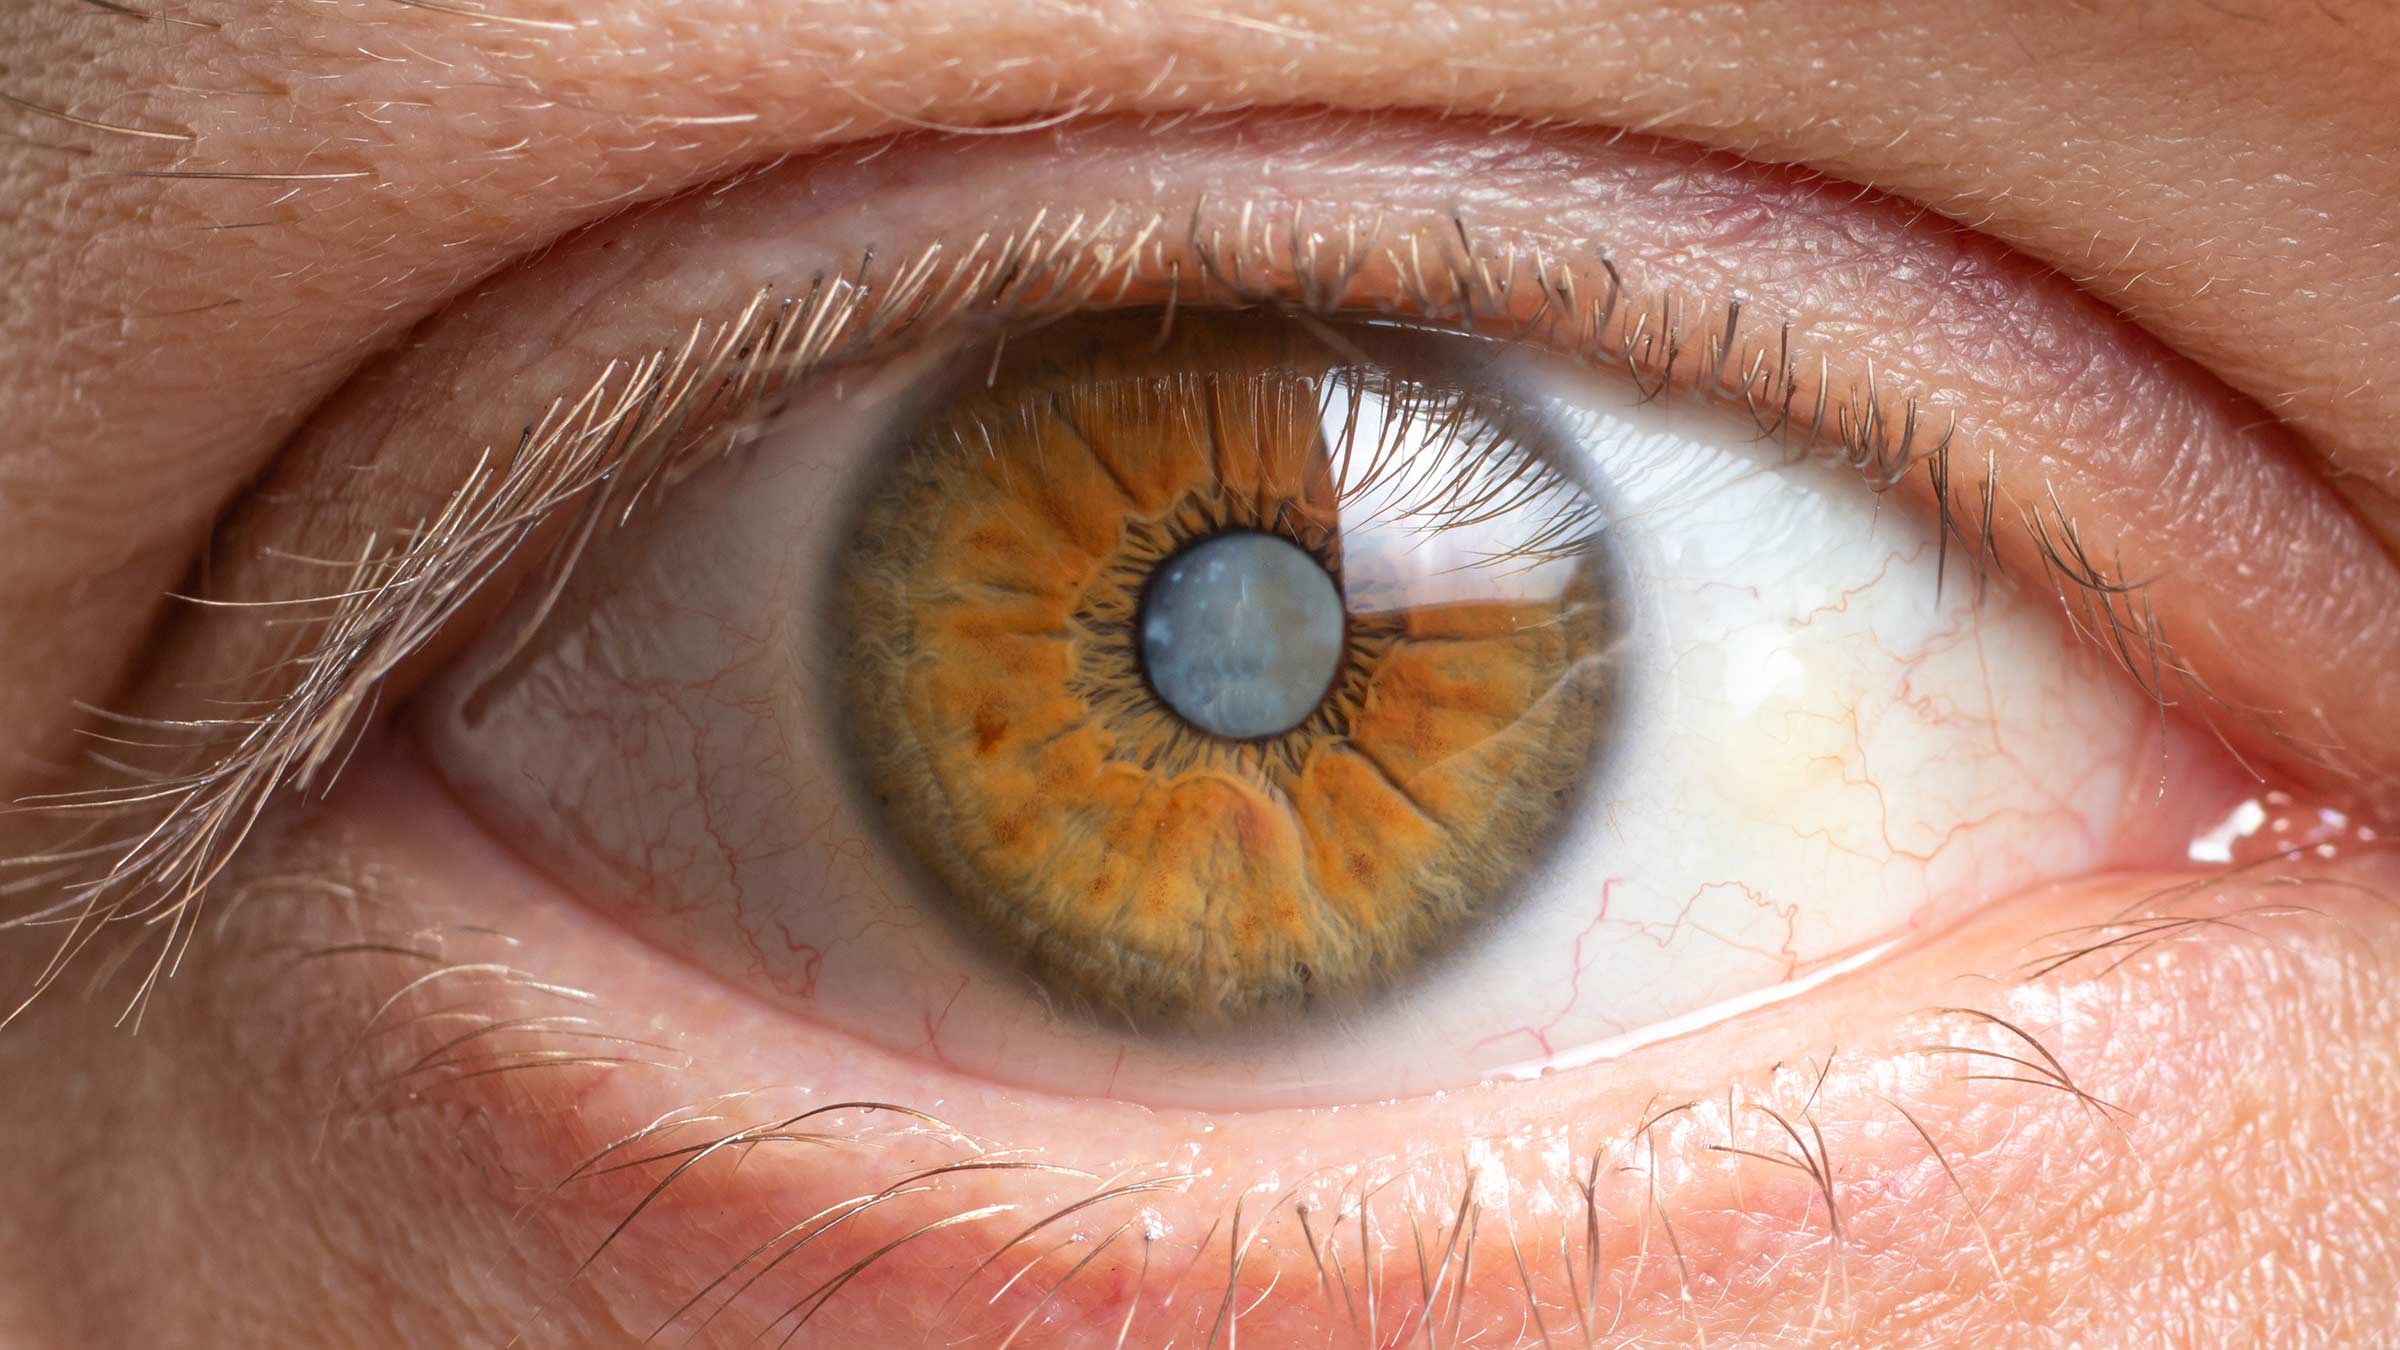 Close up image of a human eye with a cataract clouding the eye lens